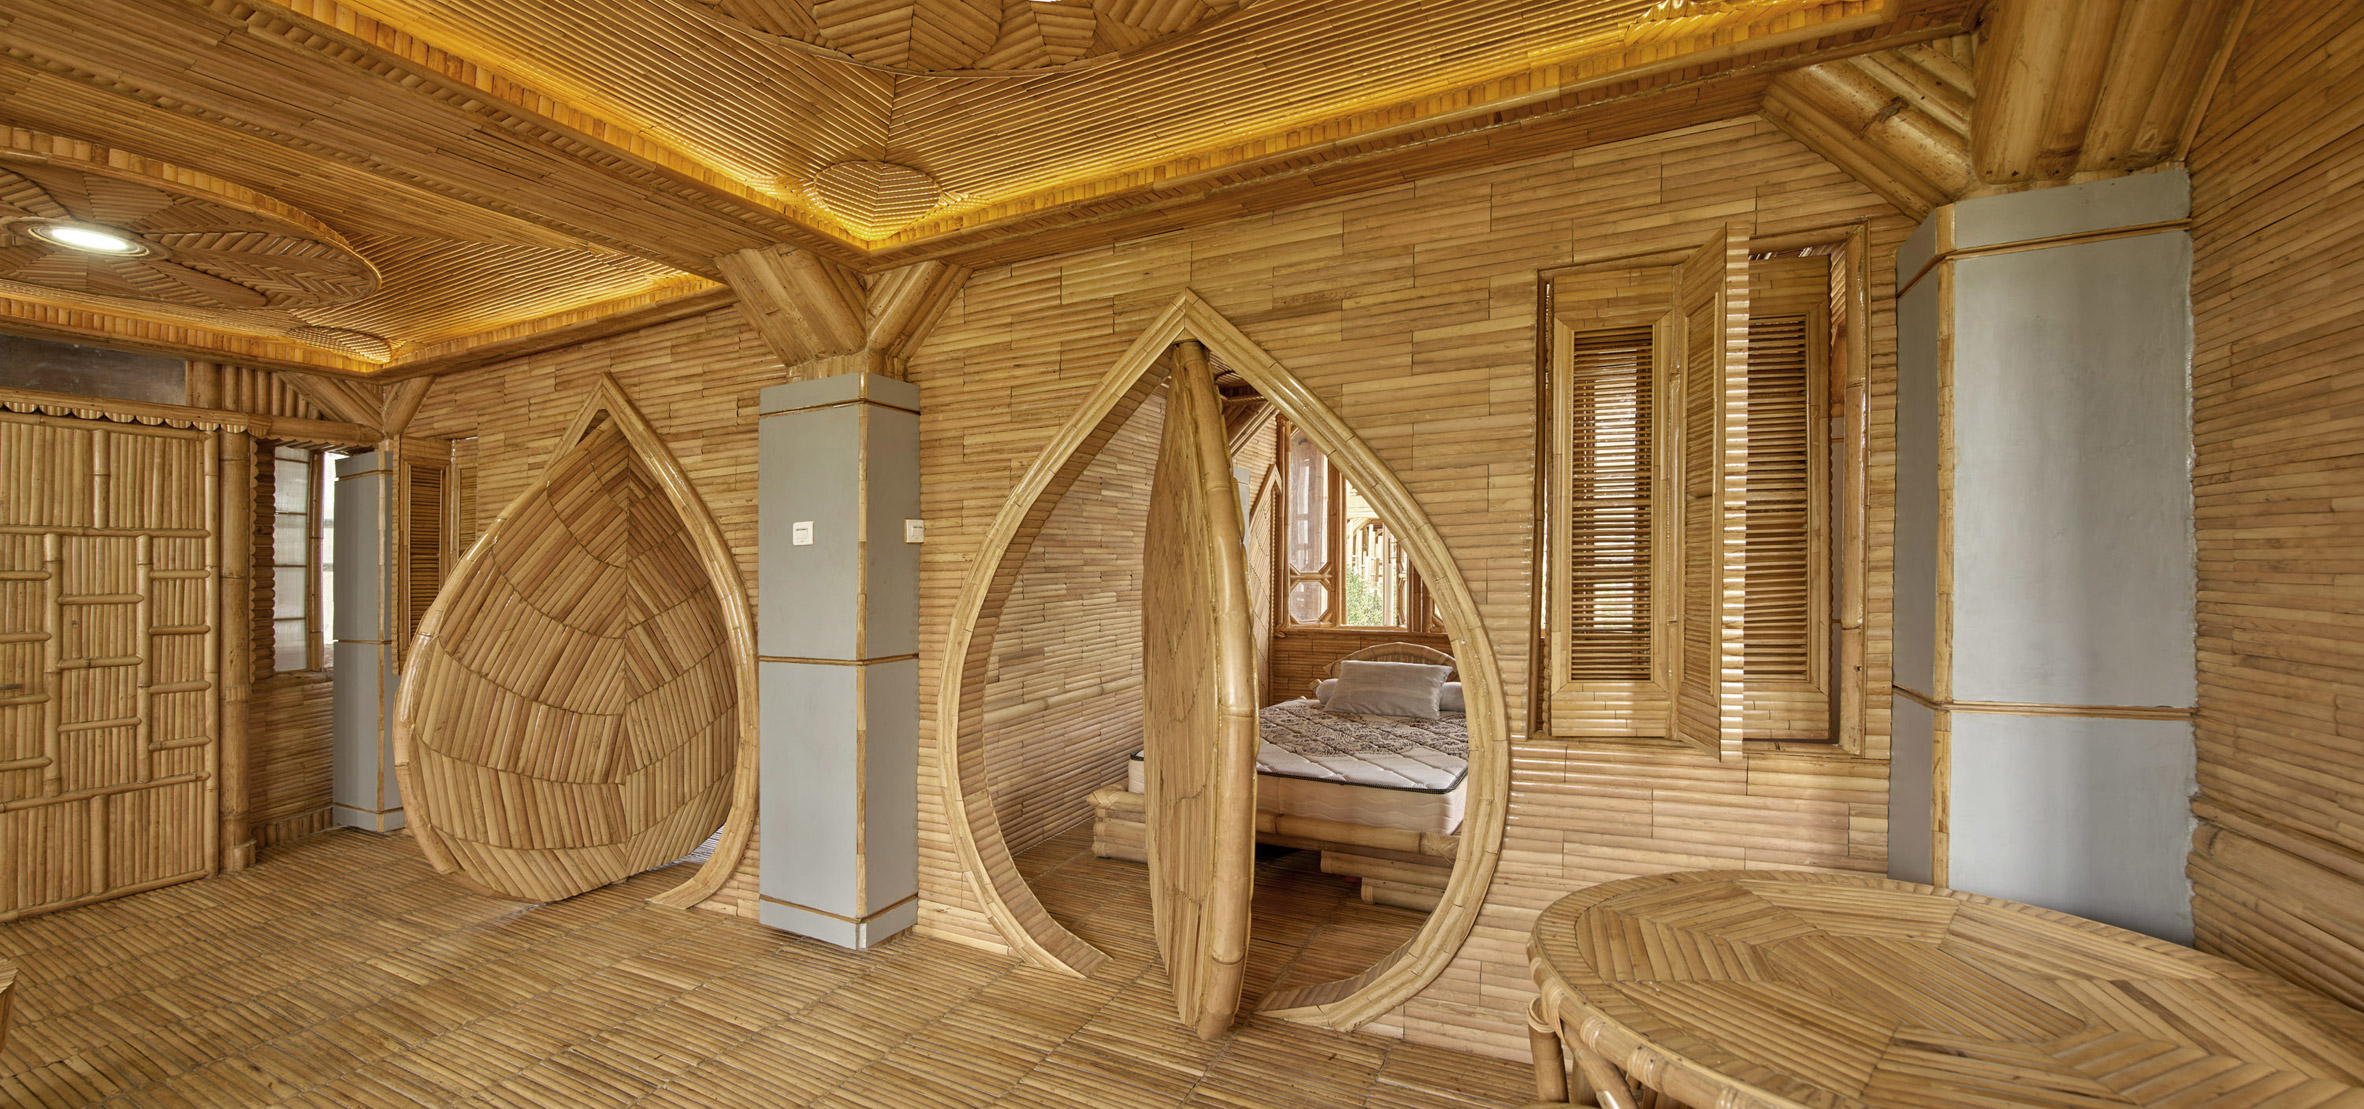 Walls, floors and ceilings were covered in bamboo throughout the structure